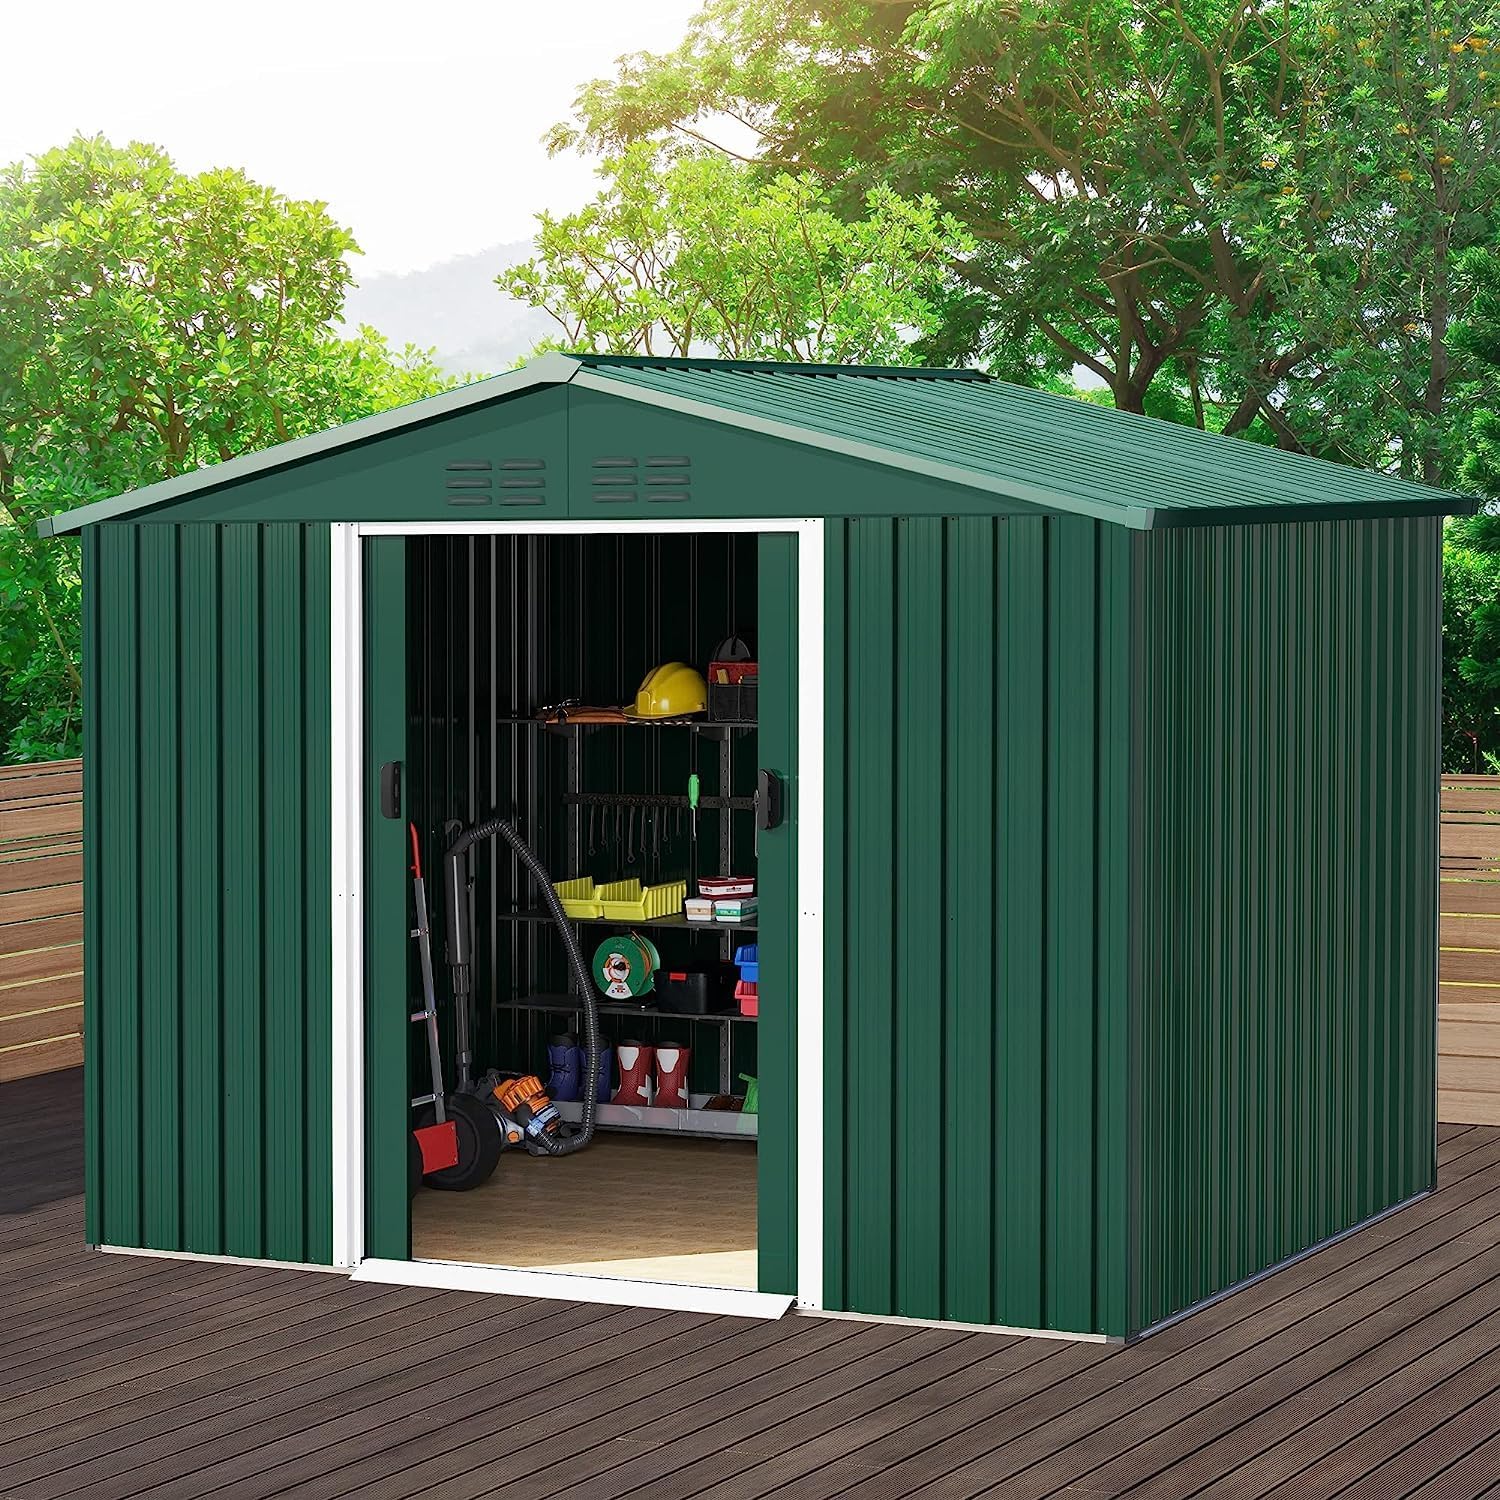 dwvo 8x6 ft outdoor storage shed review